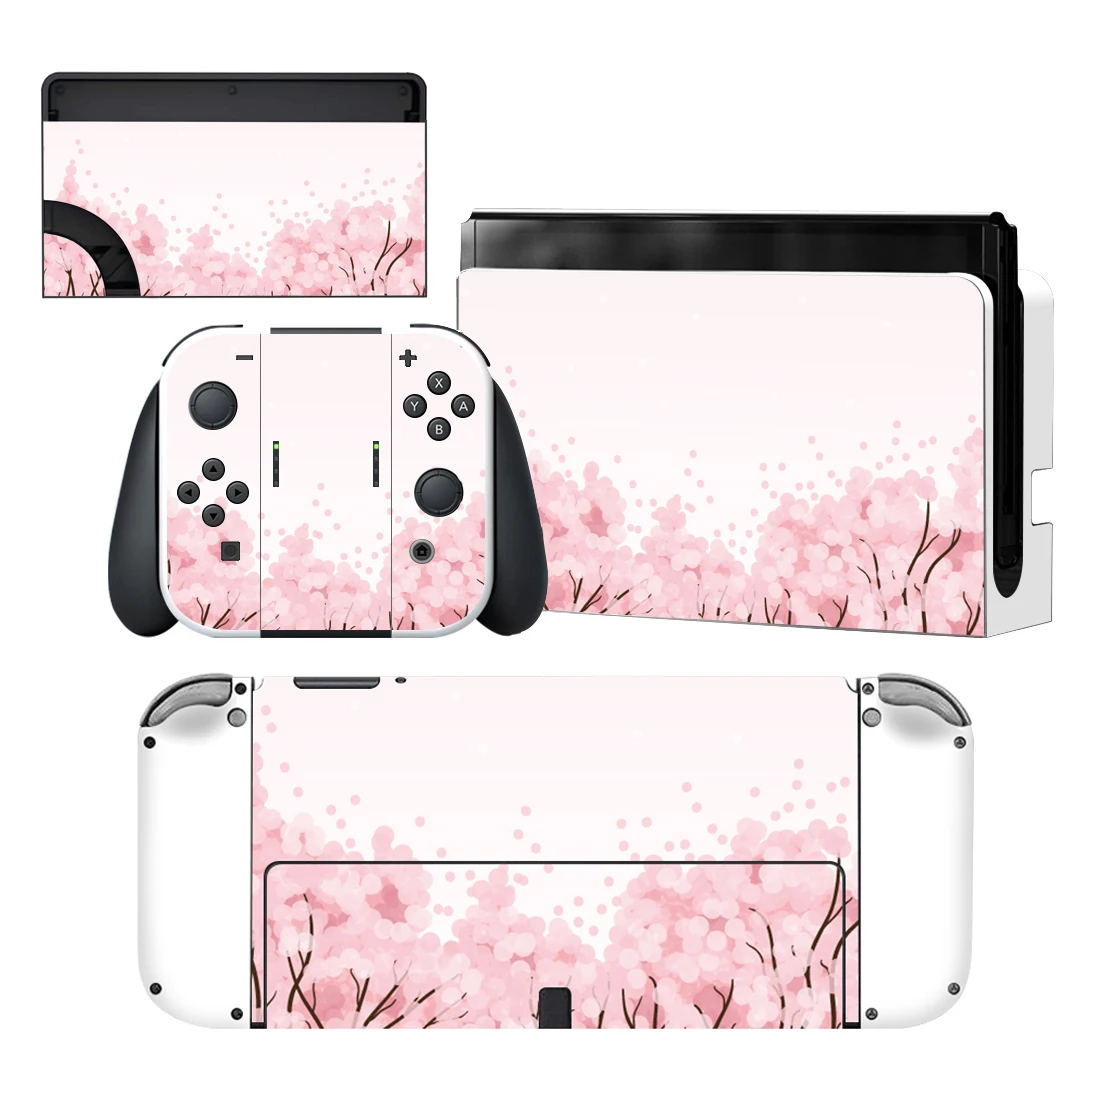 

Sakura Cherry Blossom Nintendoswitch Skin Cover Sticker Decal for Nintendo Switch OLED Console Joy-con Controller Dock Vinyl